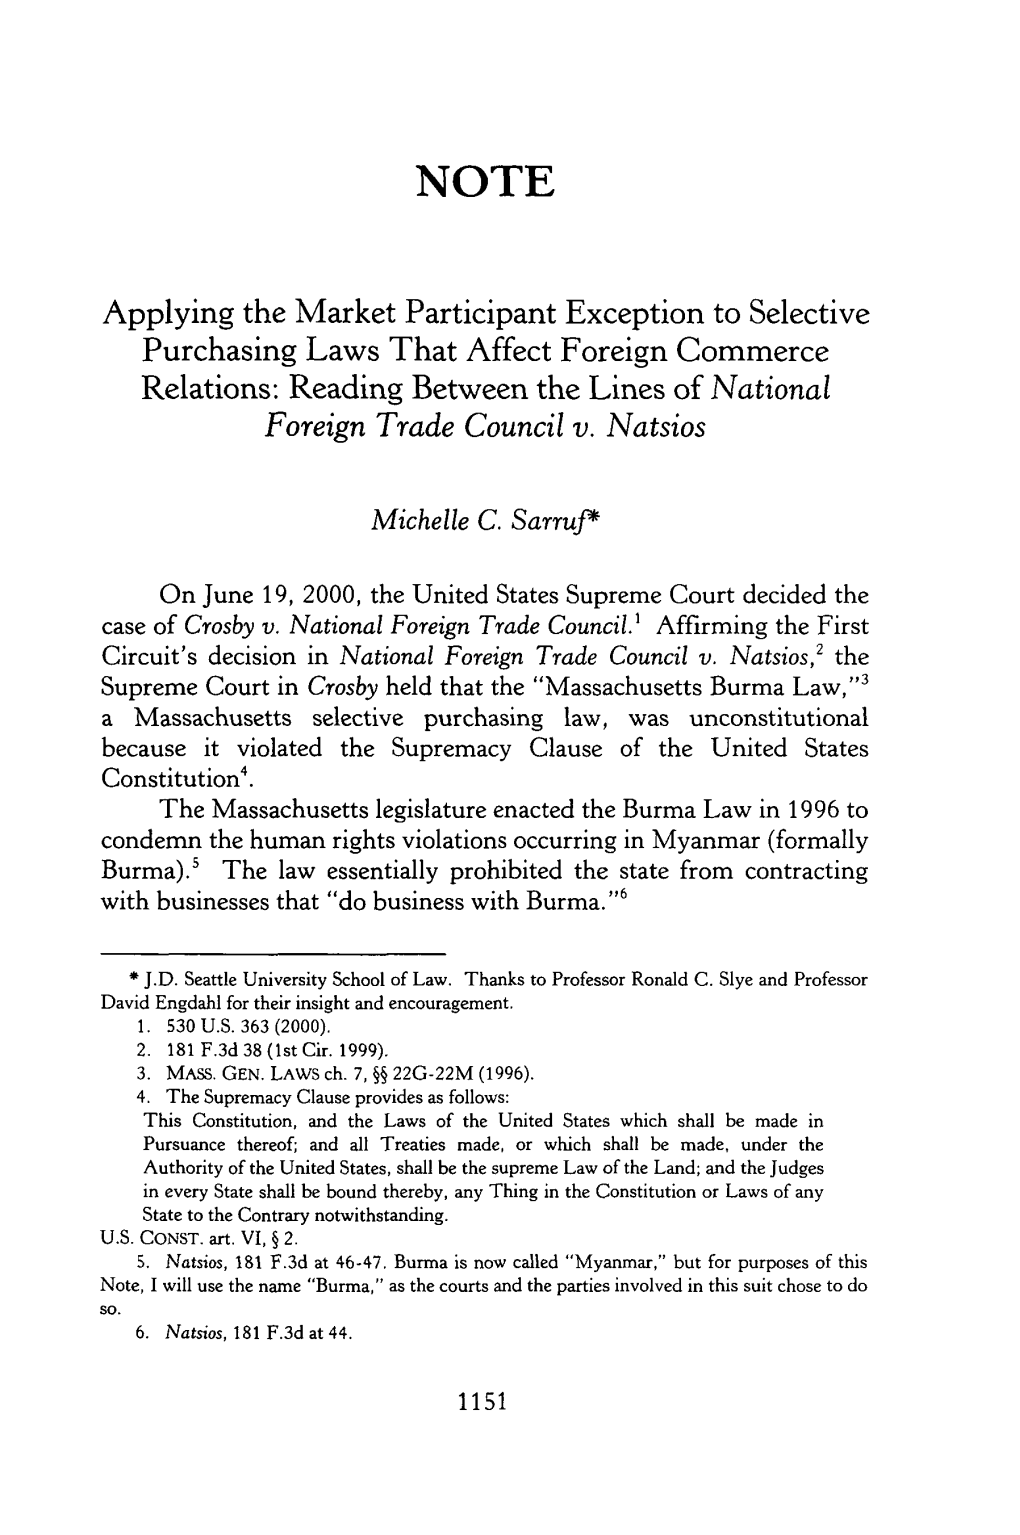 Applying the Market Participant Exception to Selective Purchasing Laws That Affect Foreign Commerce Relations